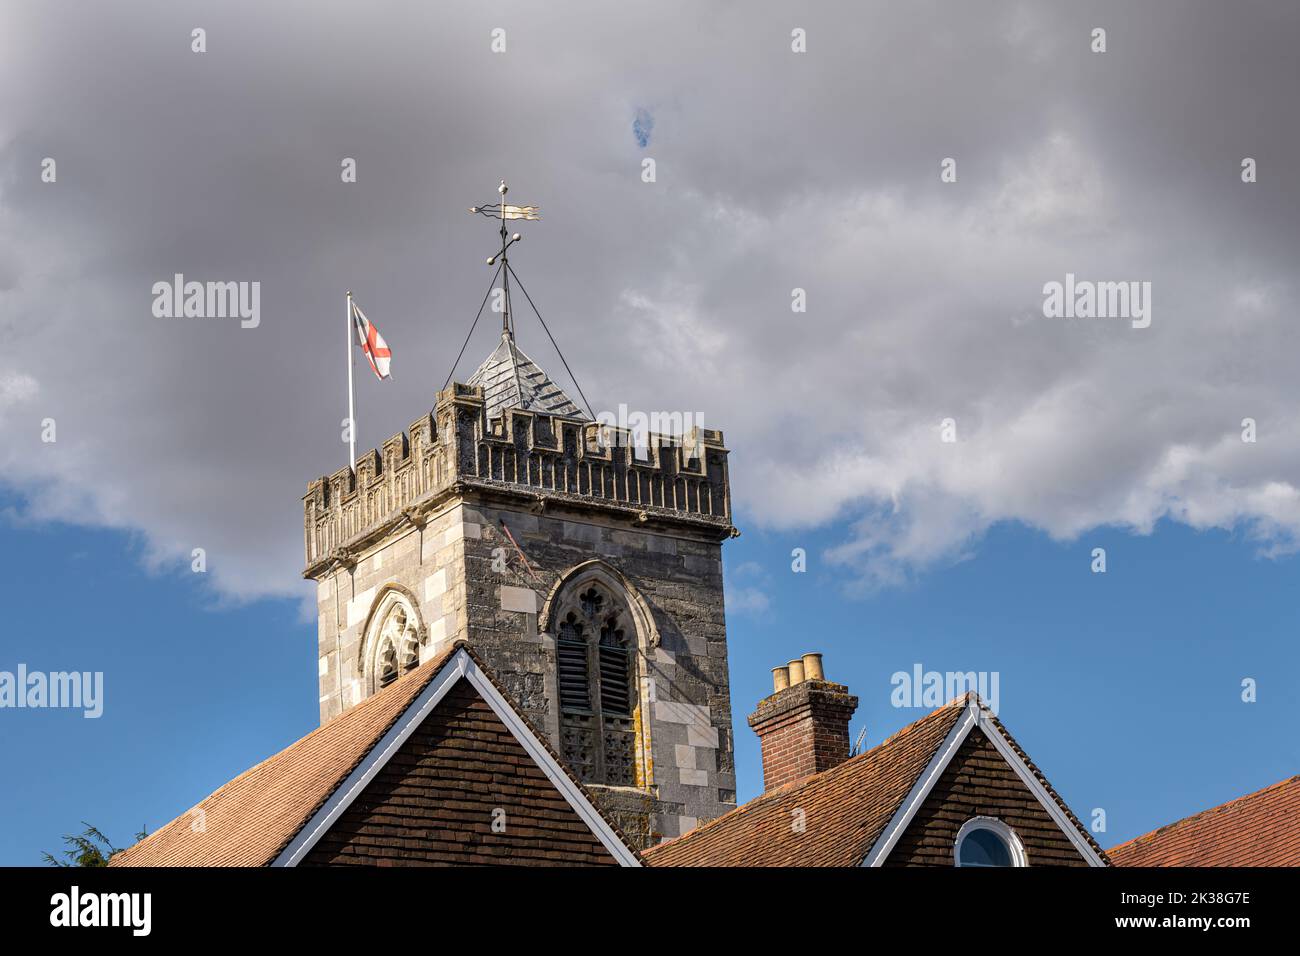 View of the tower of Saint Thomas a Becket church tower over the roofs of Salisbury, Wiltshire, England Stock Photo